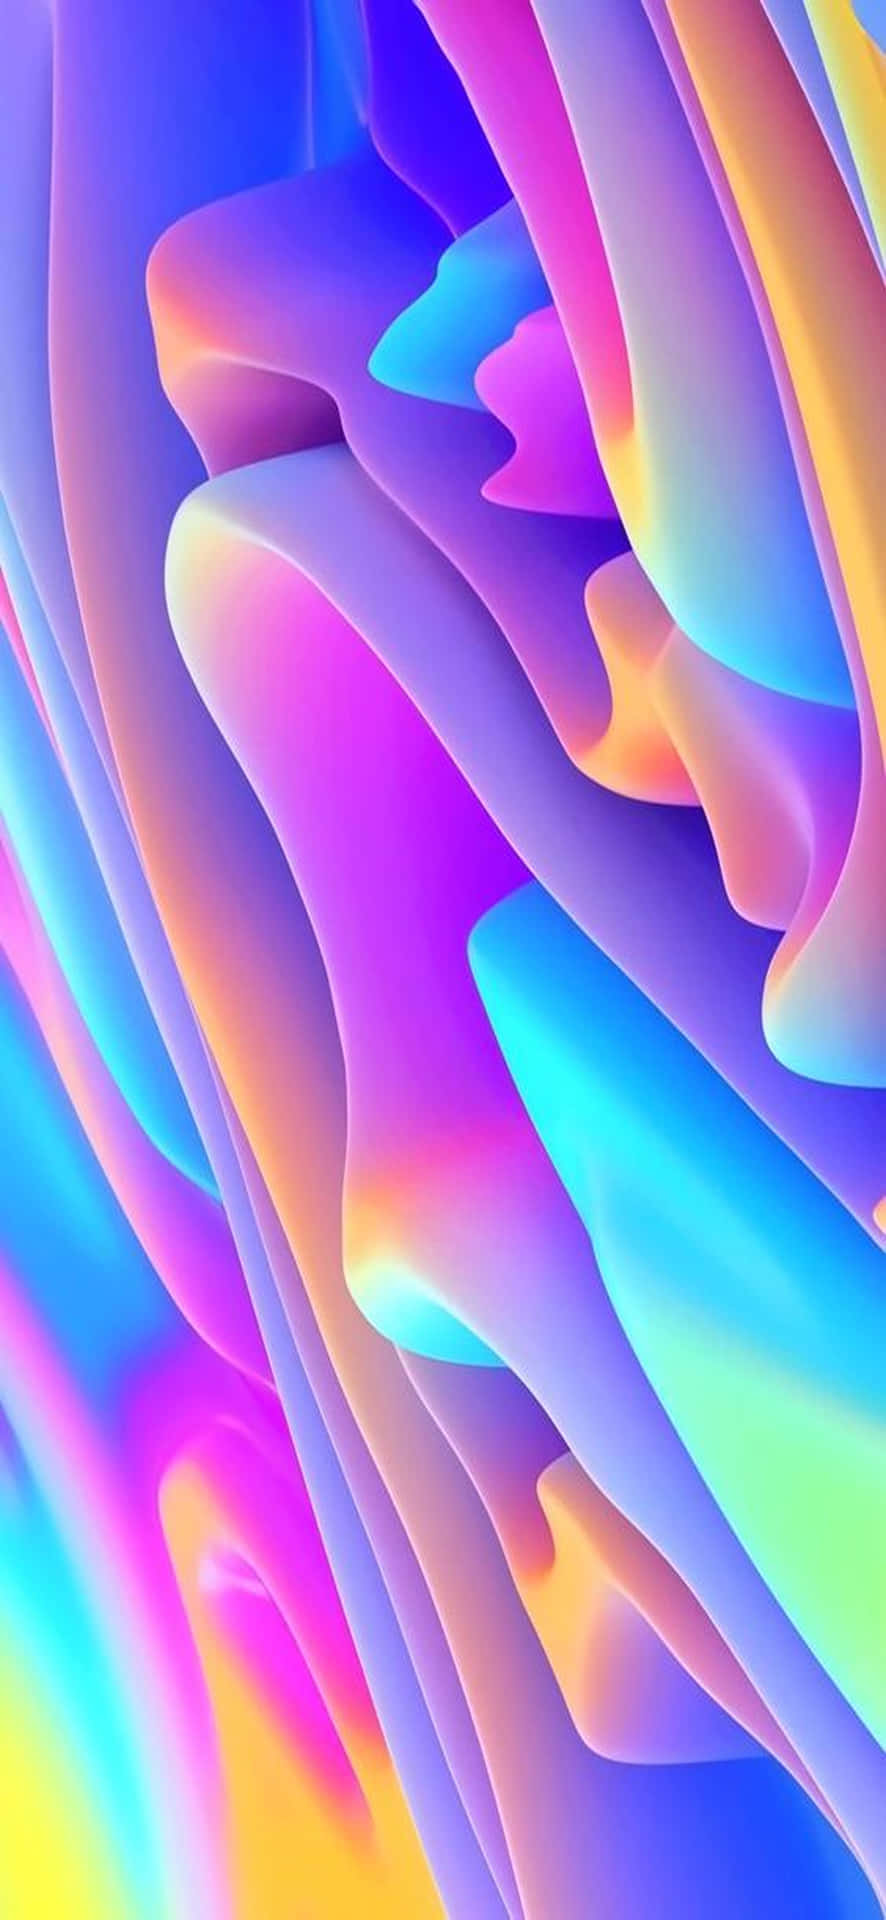 A Colorful Abstract Background With A Rainbow Colored Pattern Wallpaper